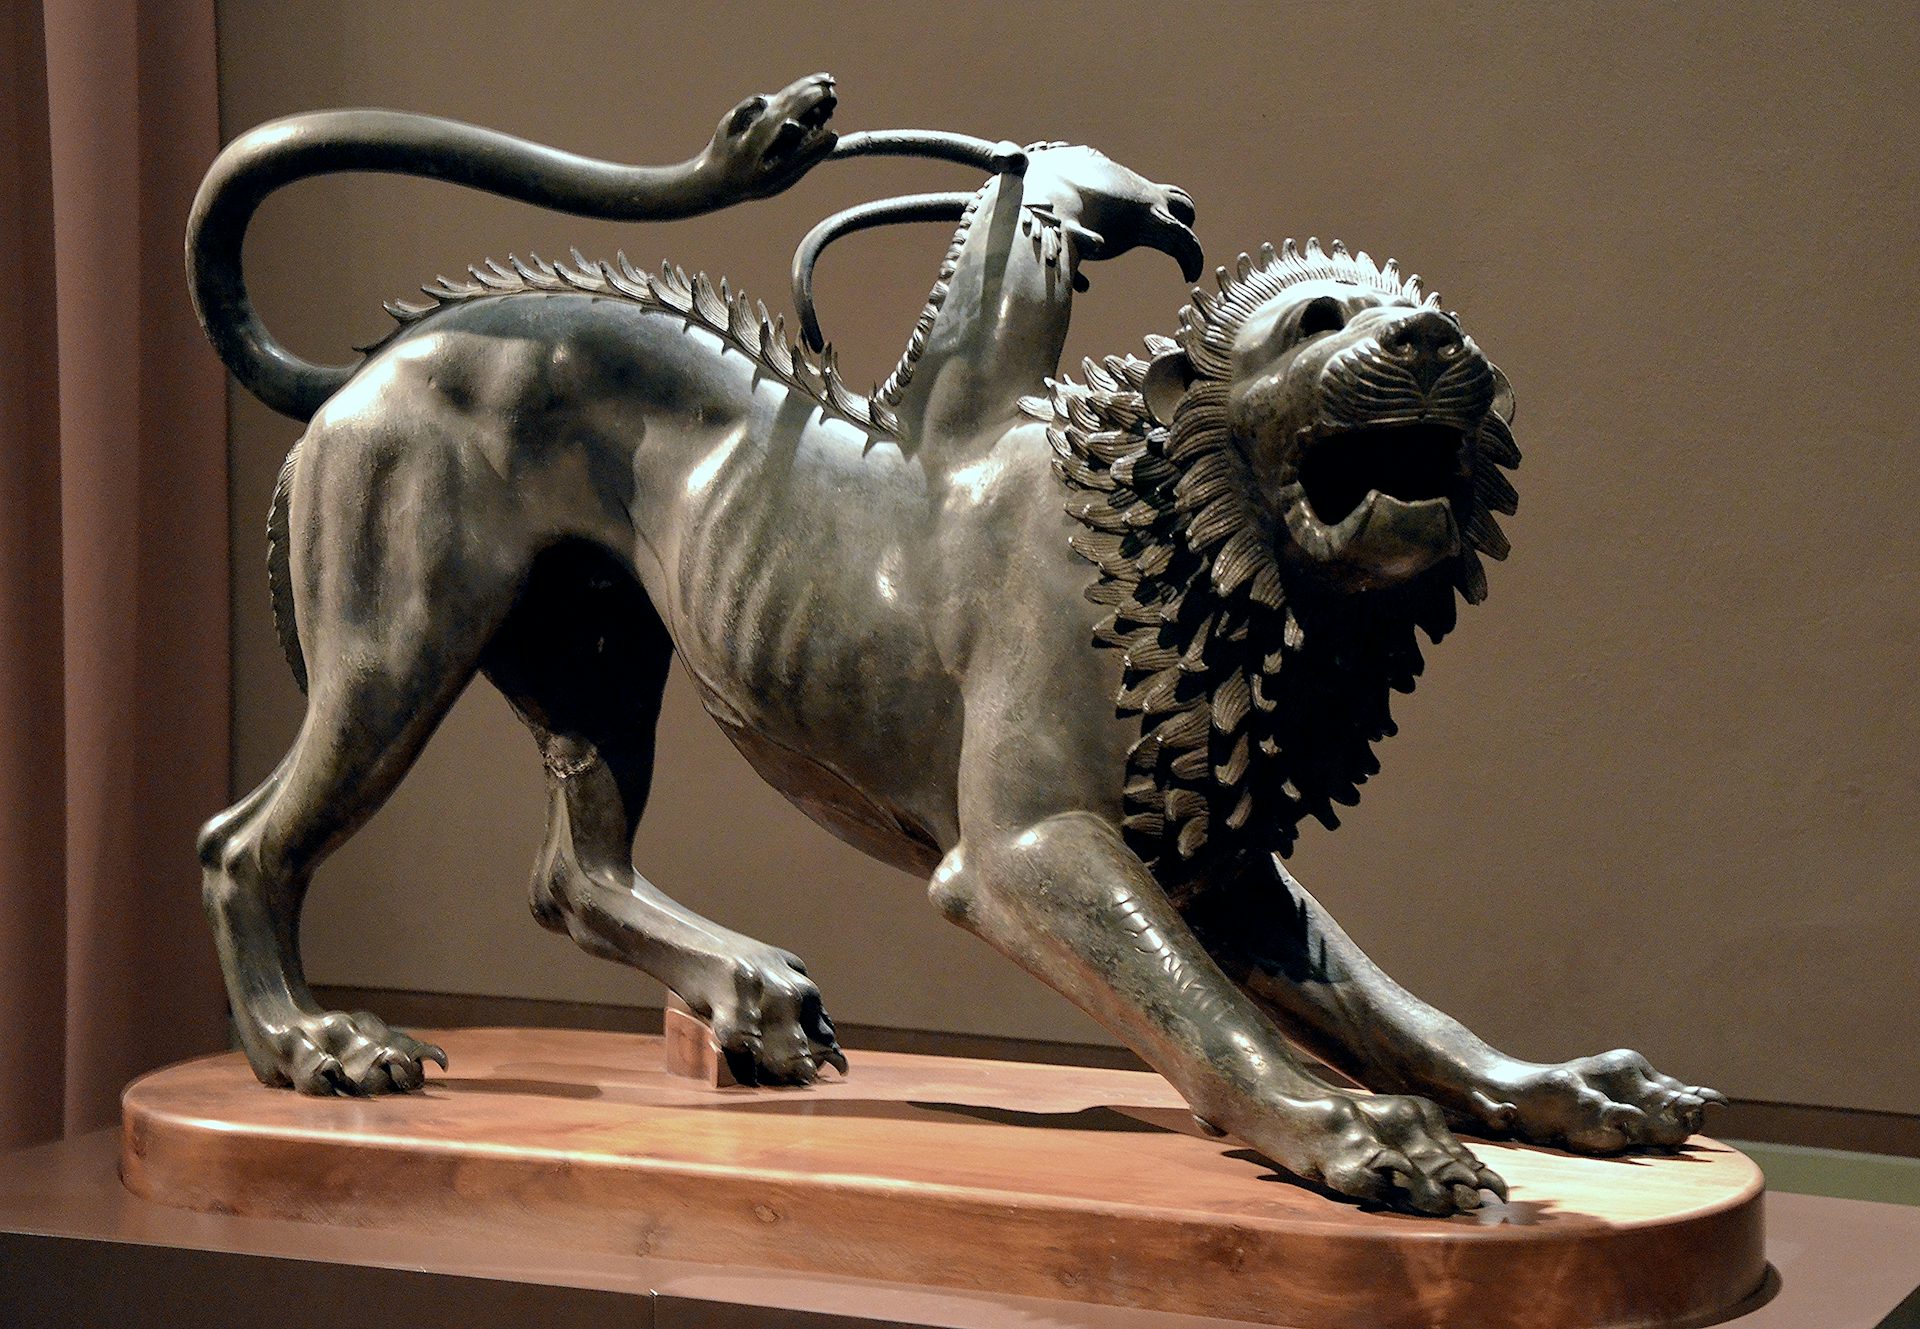 Chimera of Arezzo bronze statue, circa 400-bce, National Archaeological Museum, Florence